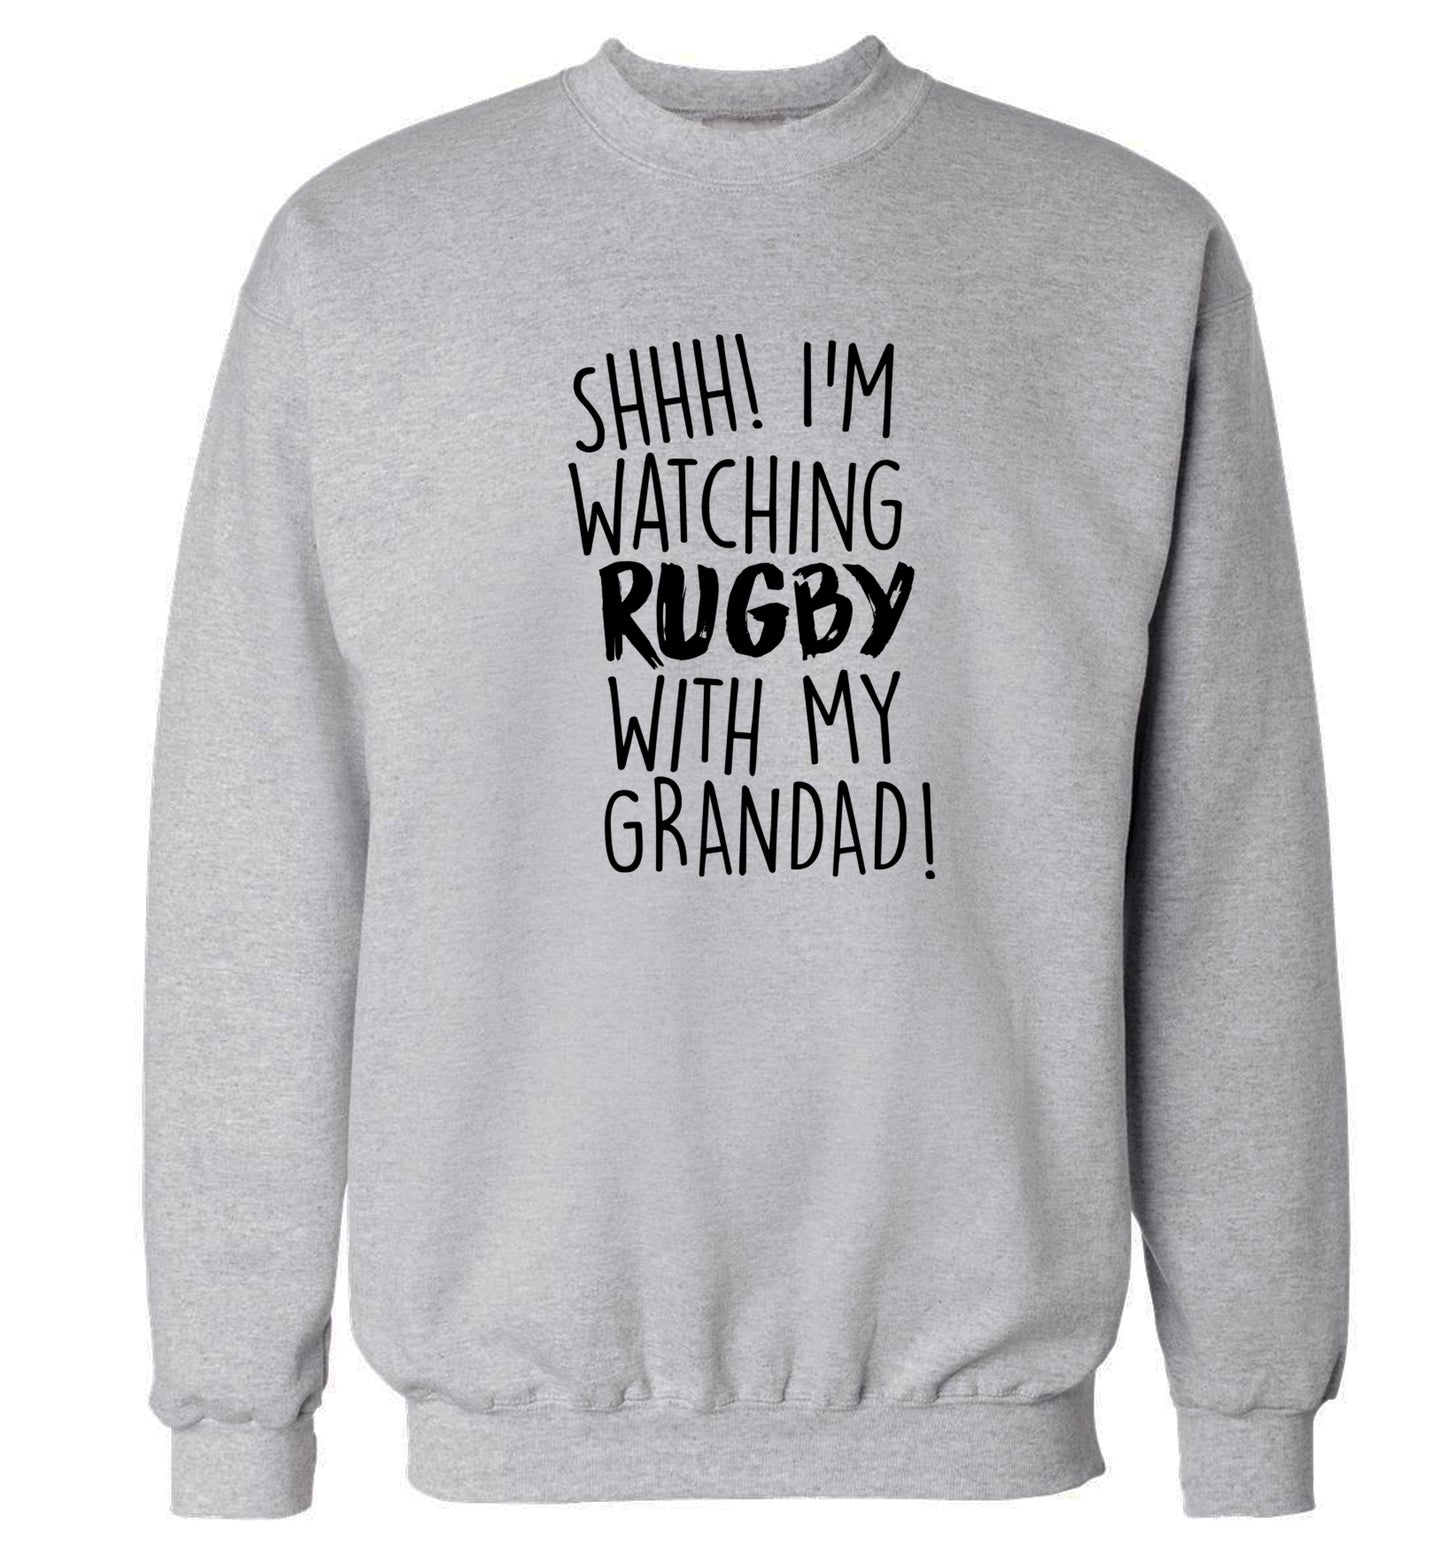 Shh I'm watching rugby with my grandaughter Adult's unisex grey Sweater 2XL